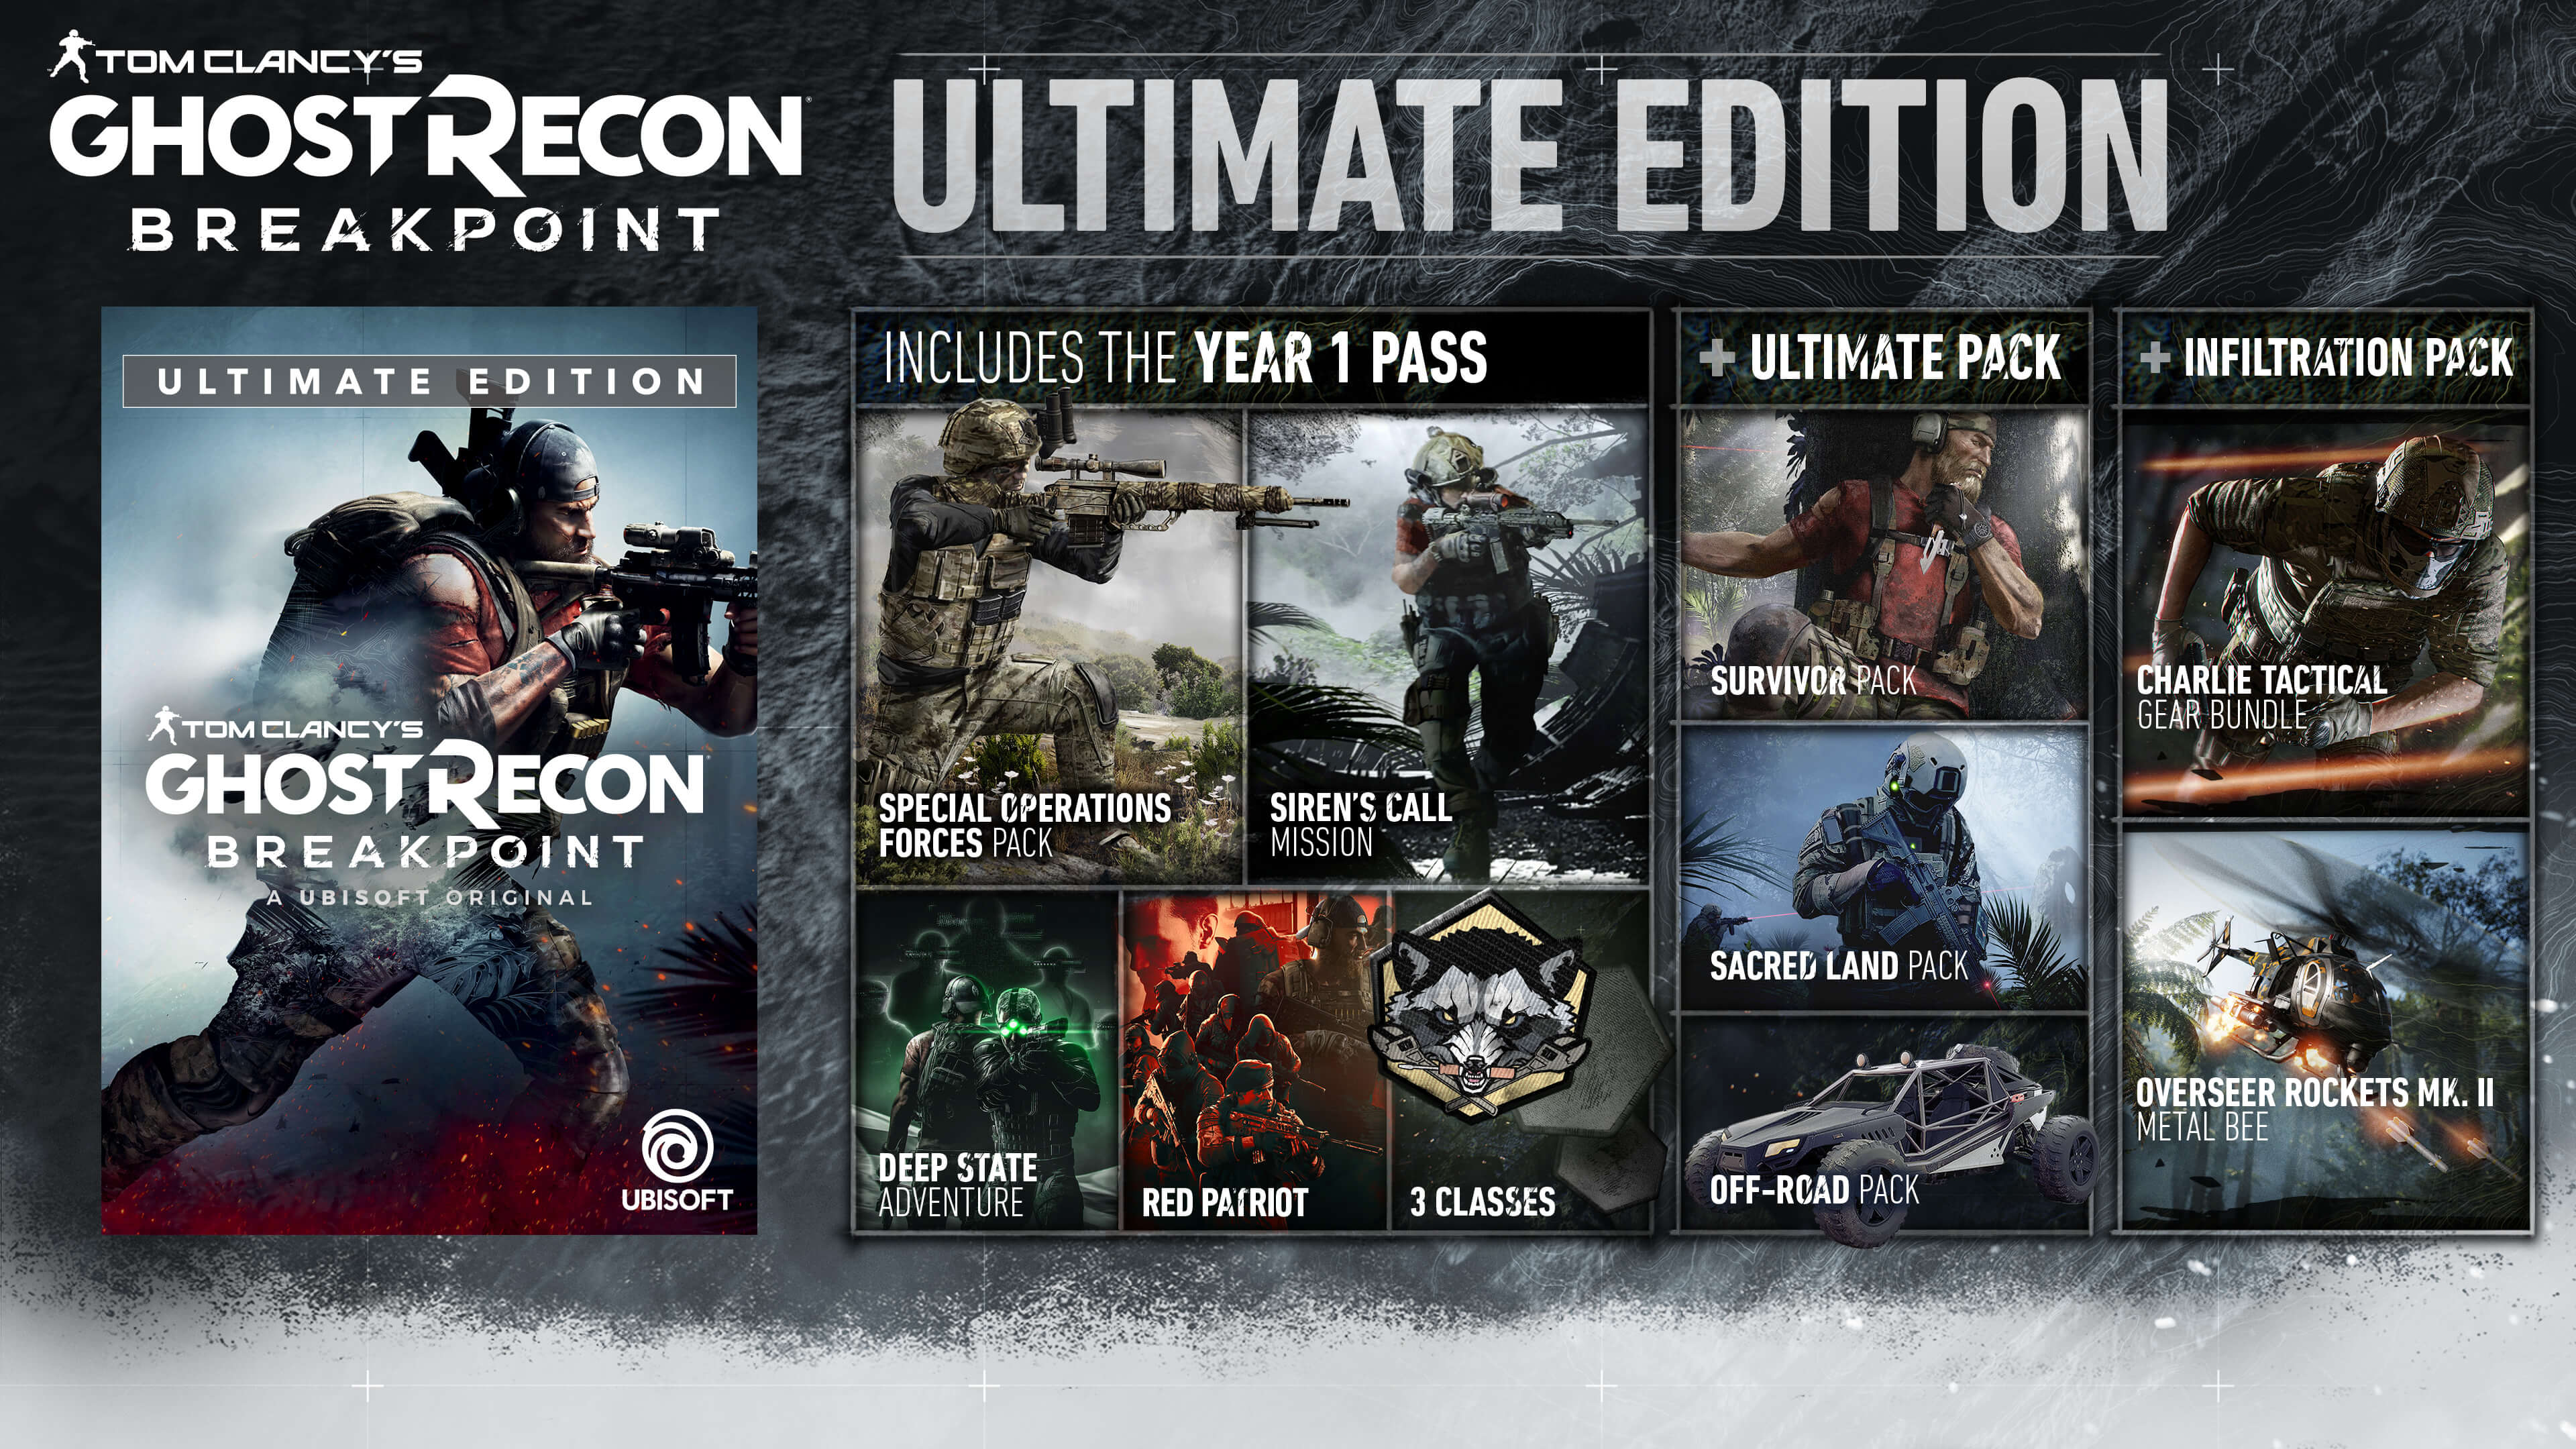 Overlord 3 1 ghost recon breakpoint. Tom Clancy's Ghost Recon breakpoint Ultimate Edition. Ghost Recon breakpoint Ultimate Edition. Шутер Ghost Recon breakpoint. Ghost Recon breakpoint издания.